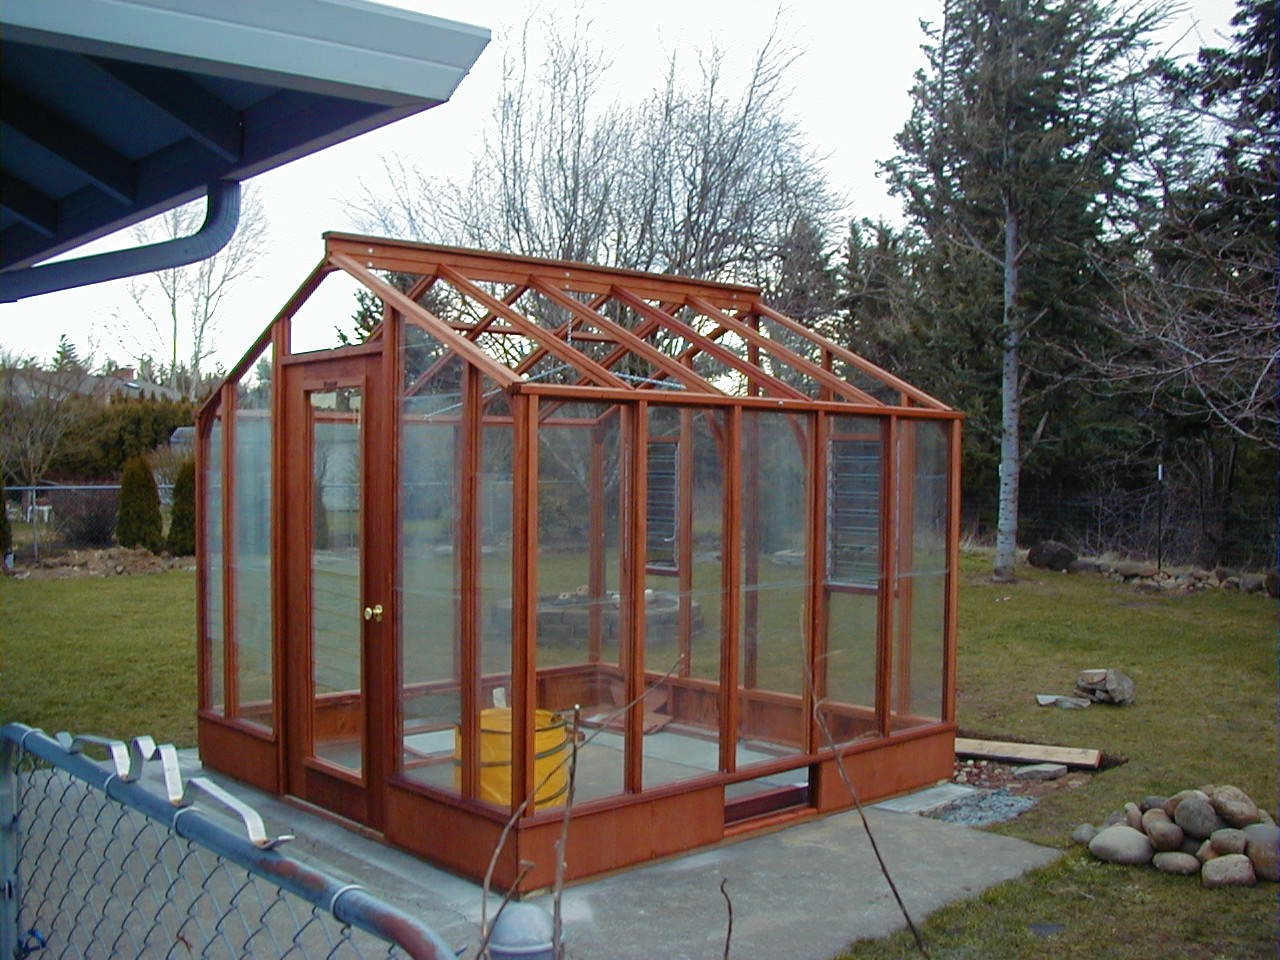 9x9 Deluxe Glass-to-Ground with two jalousie windows in back end wall and Full Lite door on 9.5" high Sturdi-Built base wall